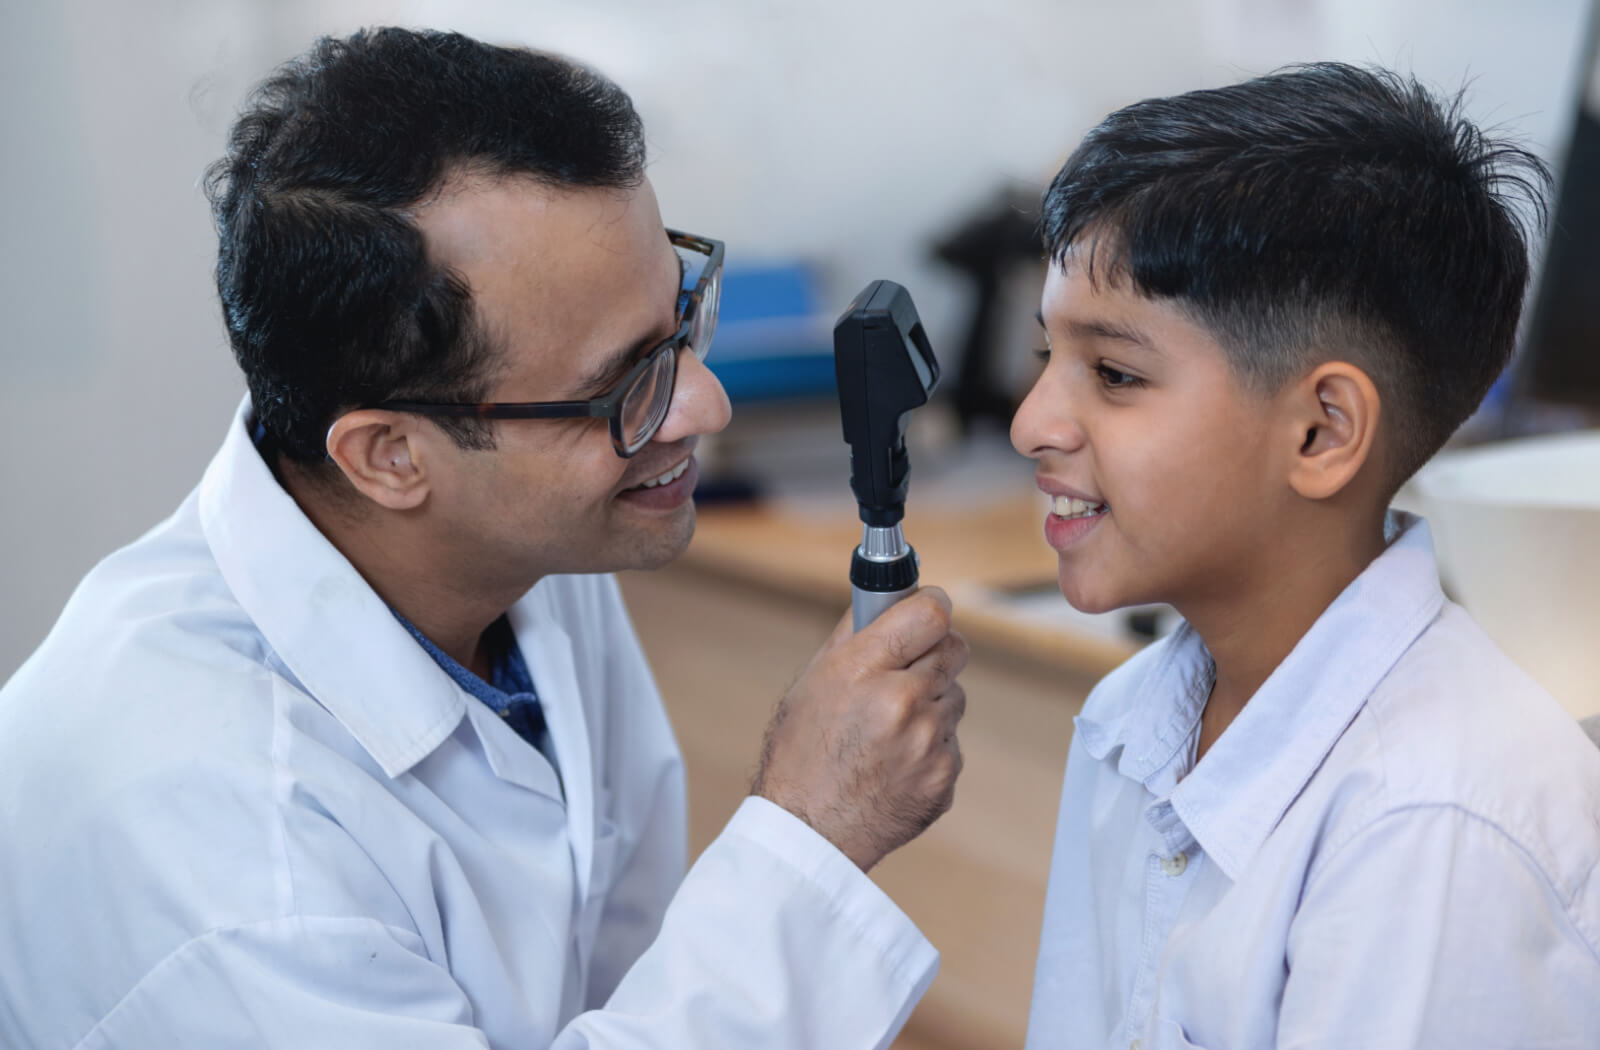 An optometrist smiling and conducting an eye exam on a child using a device that tests his vision